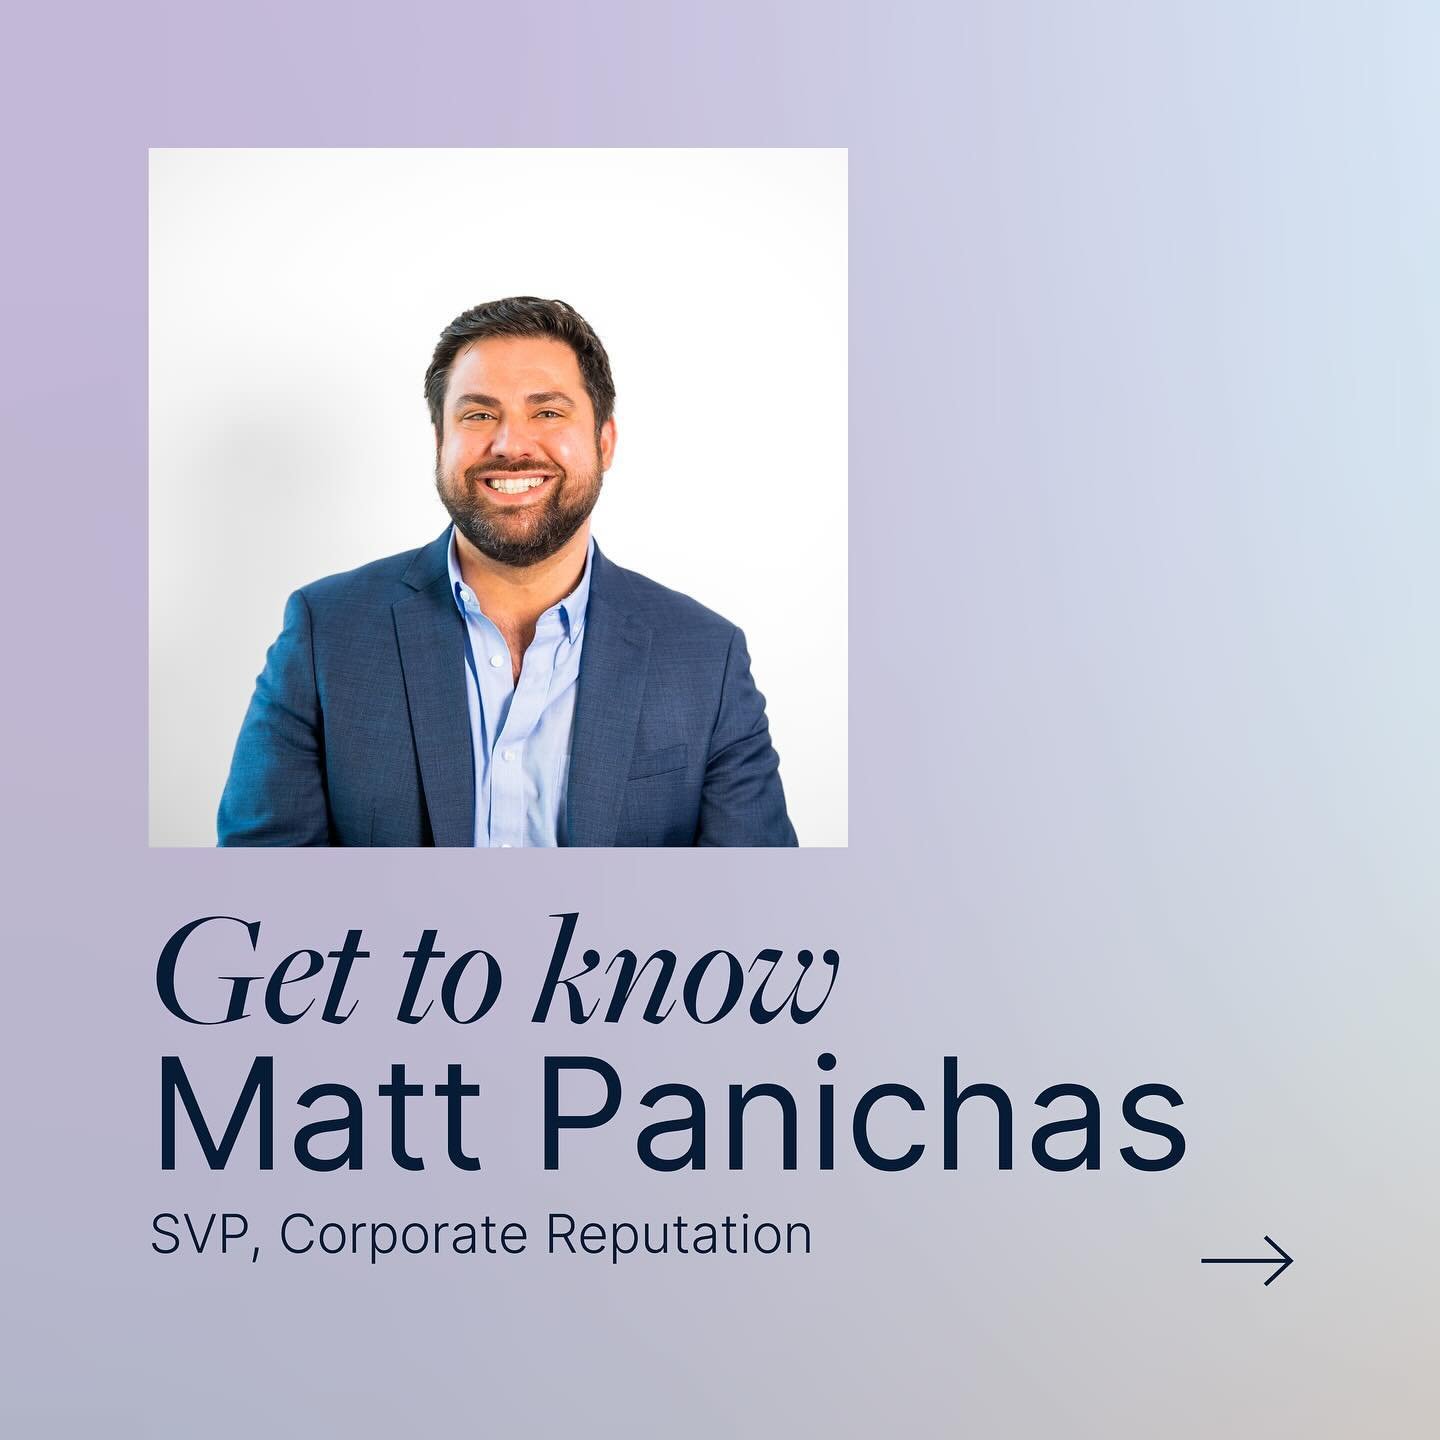 Meet Matthew&nbsp;Panichas, our newest SVP on the Corporate team and our first #KWTSpotlight feature! 🌟 🔦 Swipe to see&nbsp;Matt&rsquo;s favorite aspect of work, advice for junior employees and even a little&nbsp;secret&nbsp;👀. Anything else you w